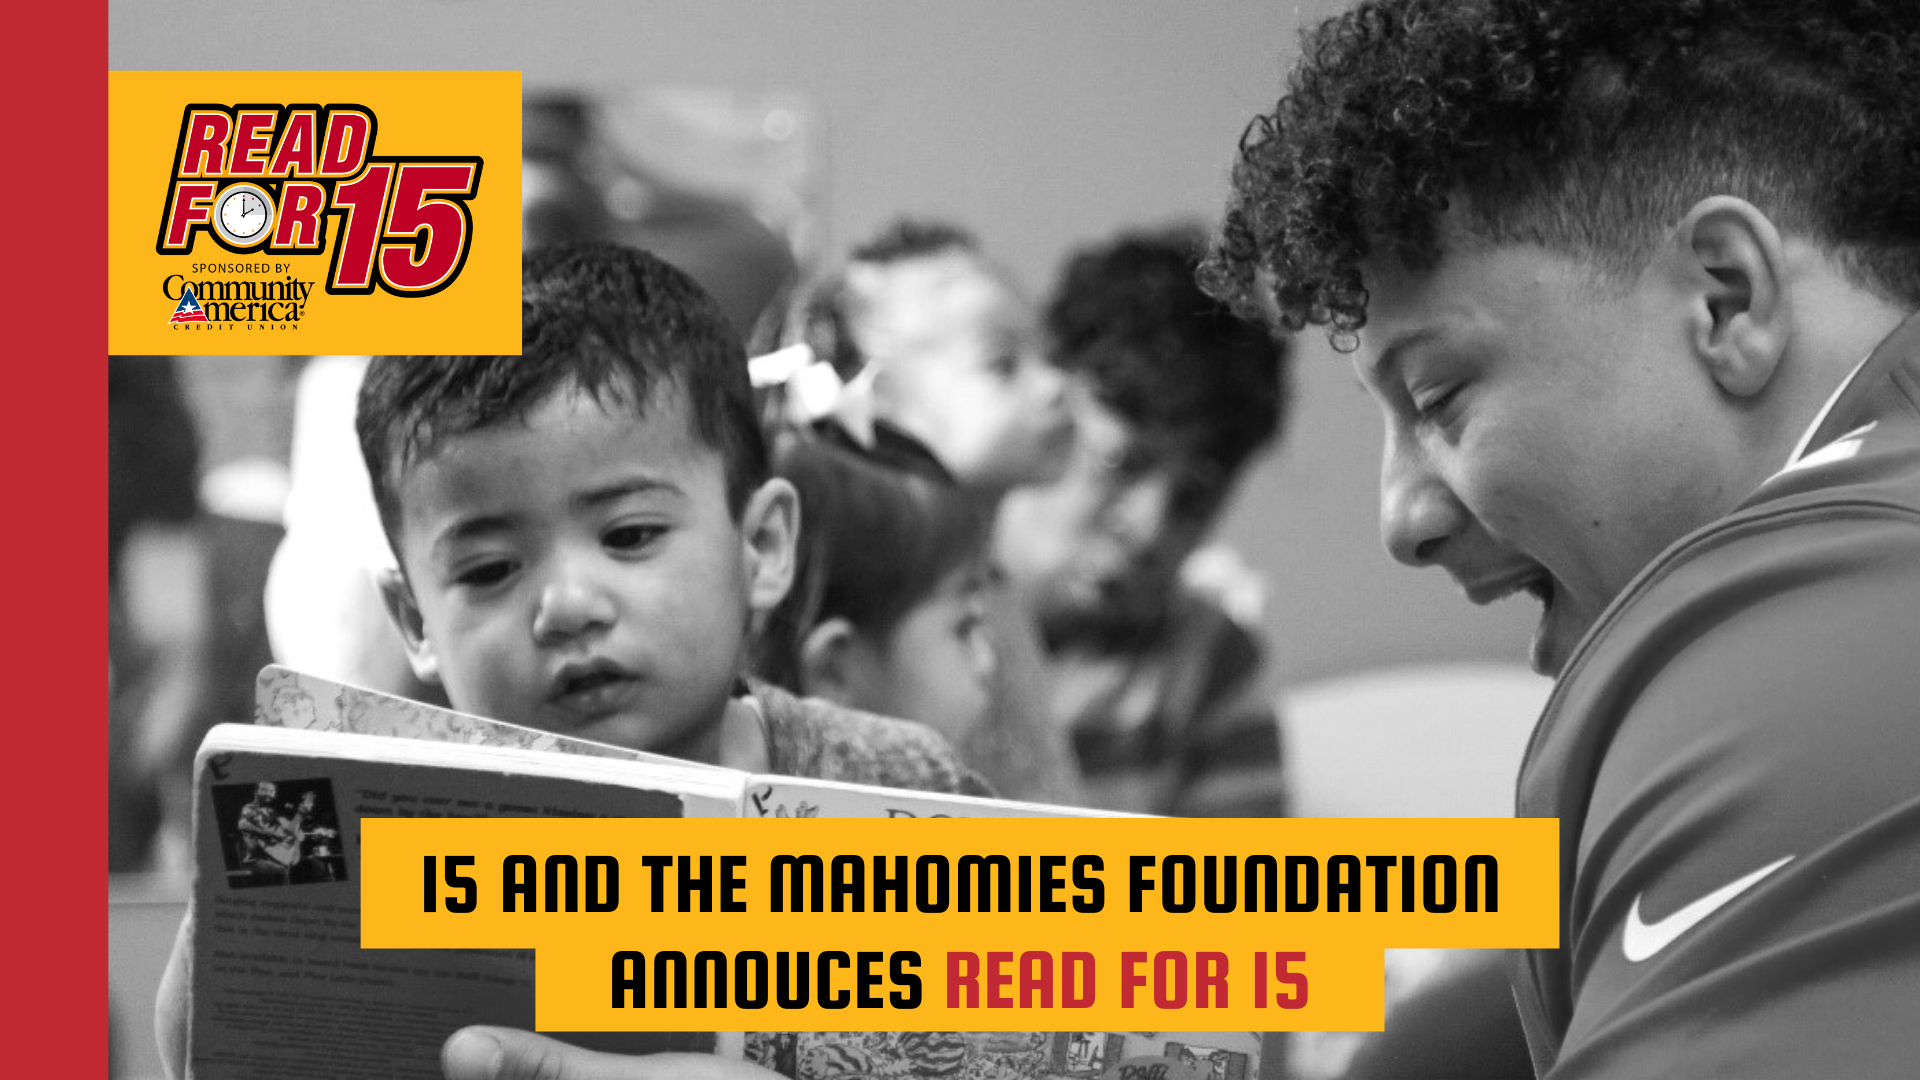 15 and the Mahomies Announces Read For 15 Program